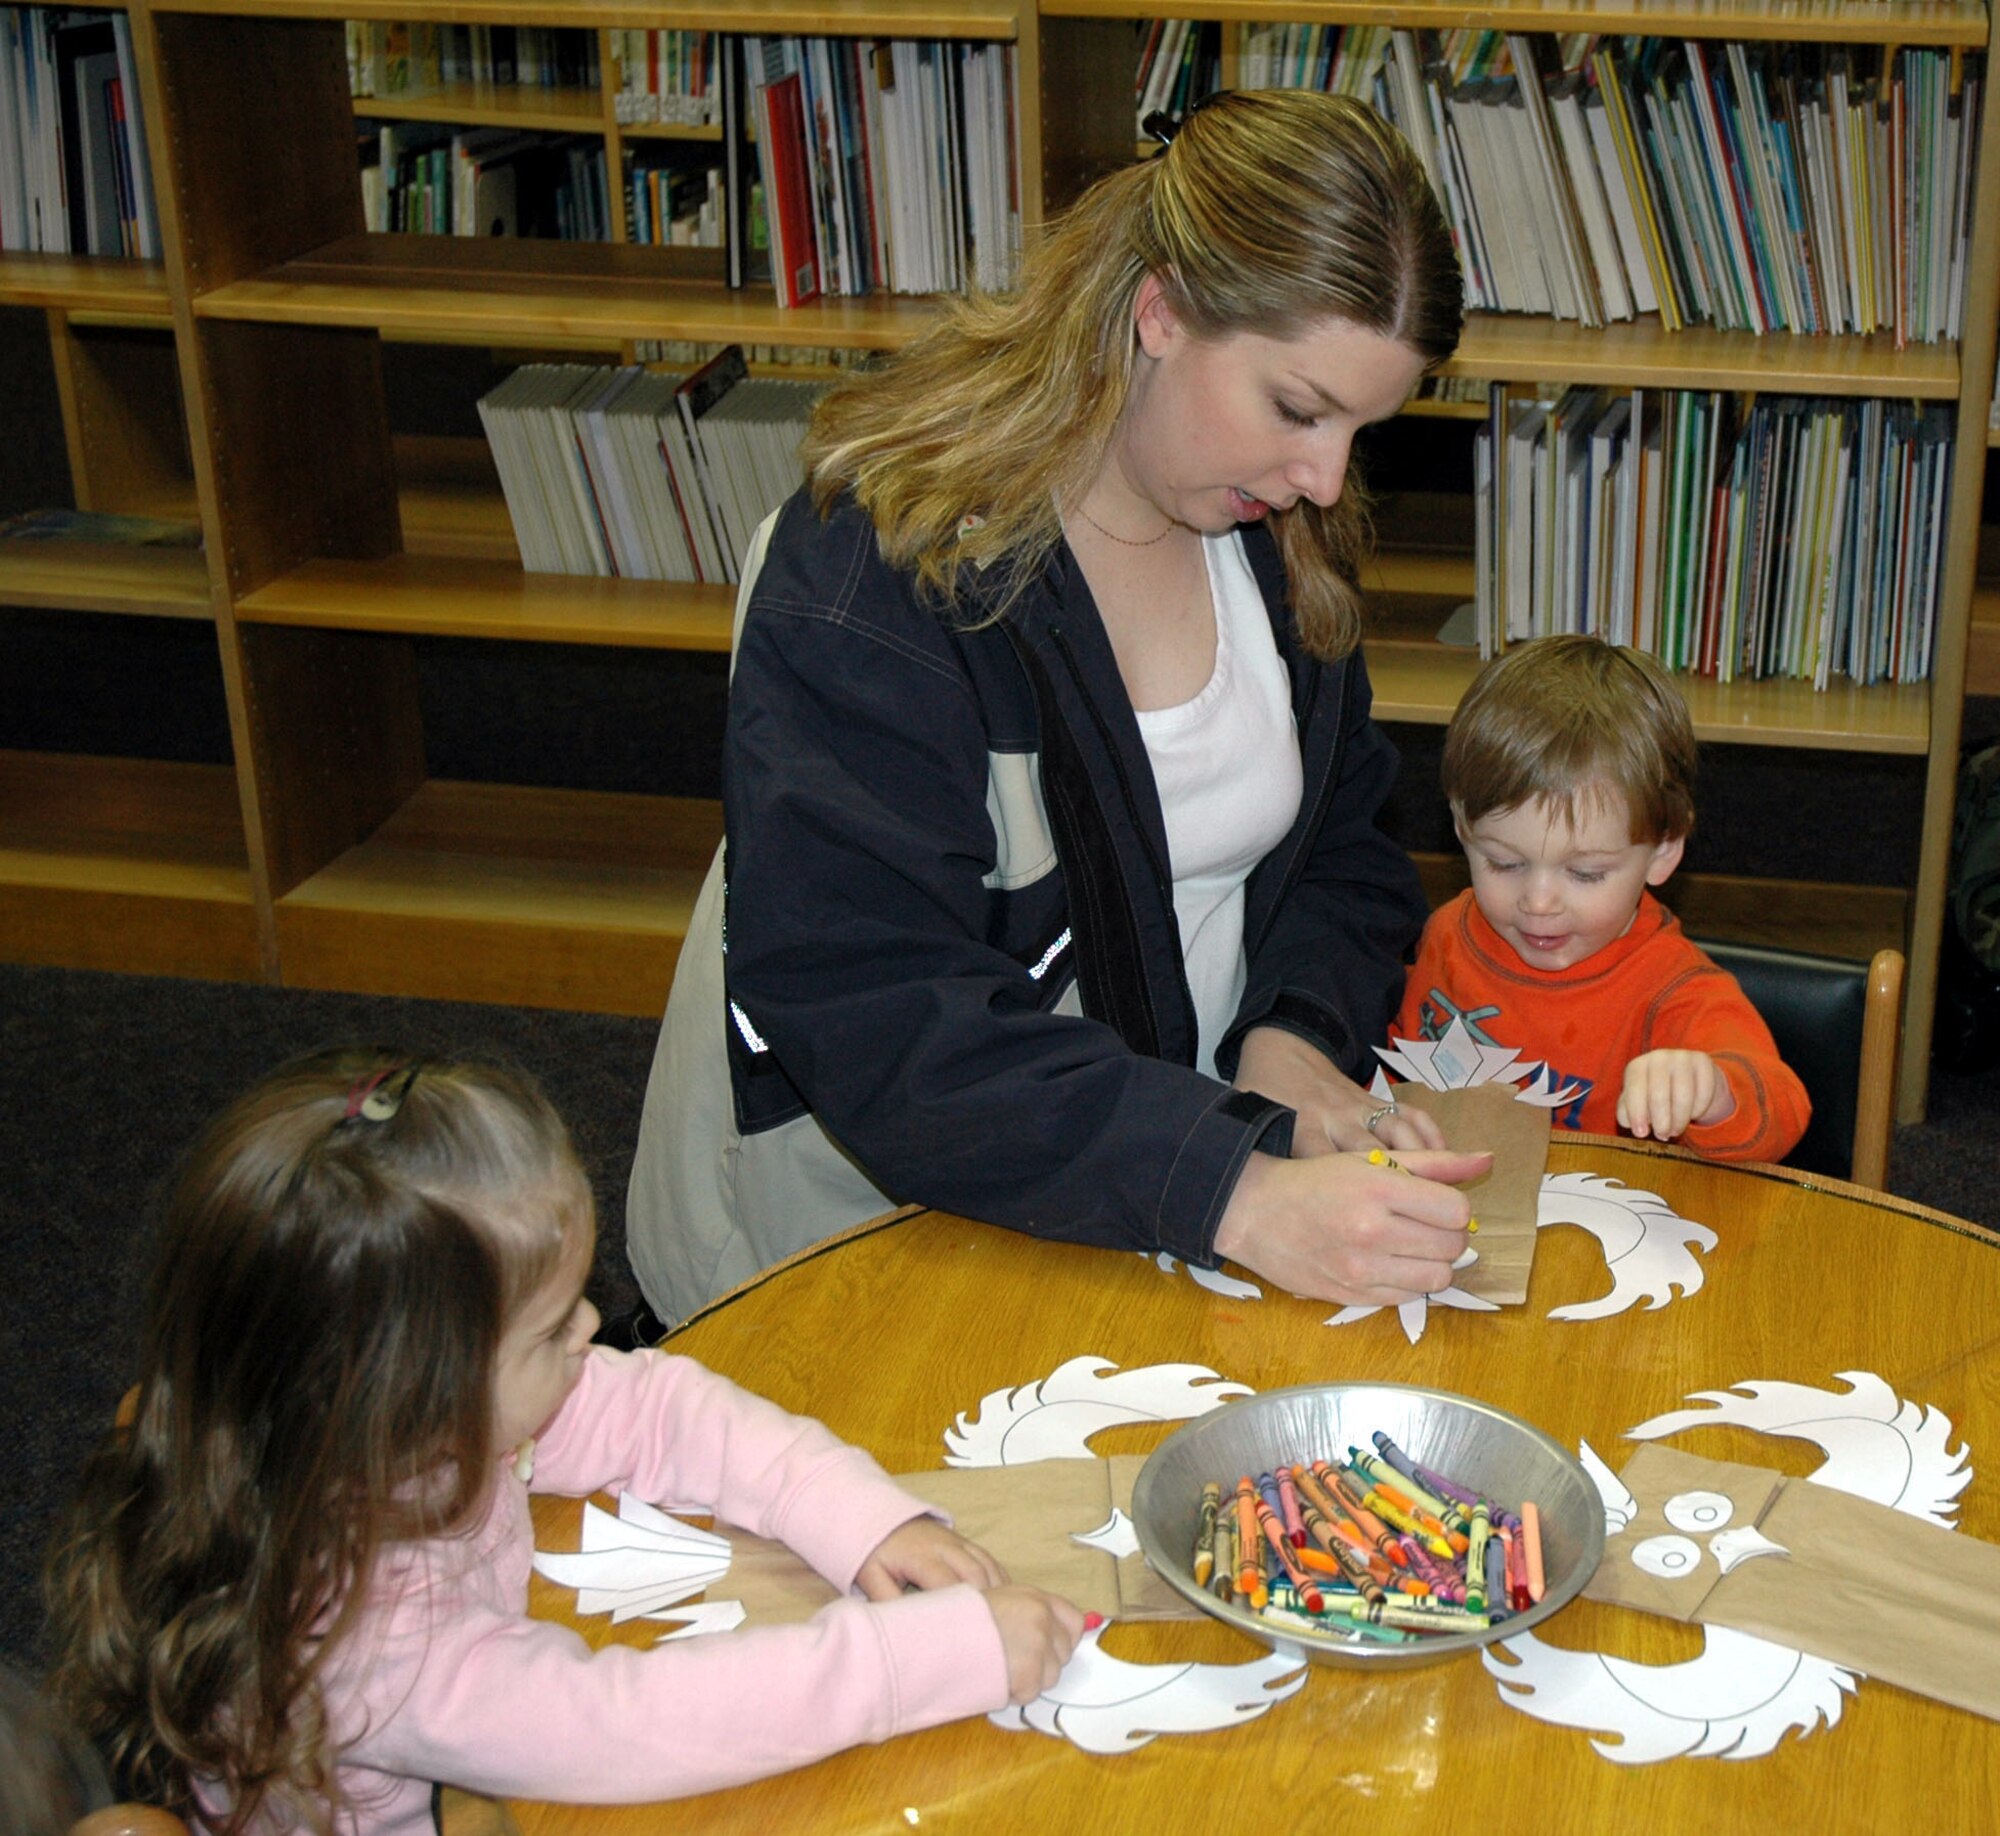 Nicki Hope helps her son, Jayden, 2, color his owl-themed craft project Jan. 22 at the Arden G. Hill Memorial Library, while Little Warrior Annika, 2 ½, looks on and creates her own art project. Each Tuesday at 10 a.m., the library holds storytime and the children create craft projects that coincide with the day’s reading theme. Check out other library events at www.341services.com/library. (U.S. Air Force photo/Senior Airman Eydie Sakura)